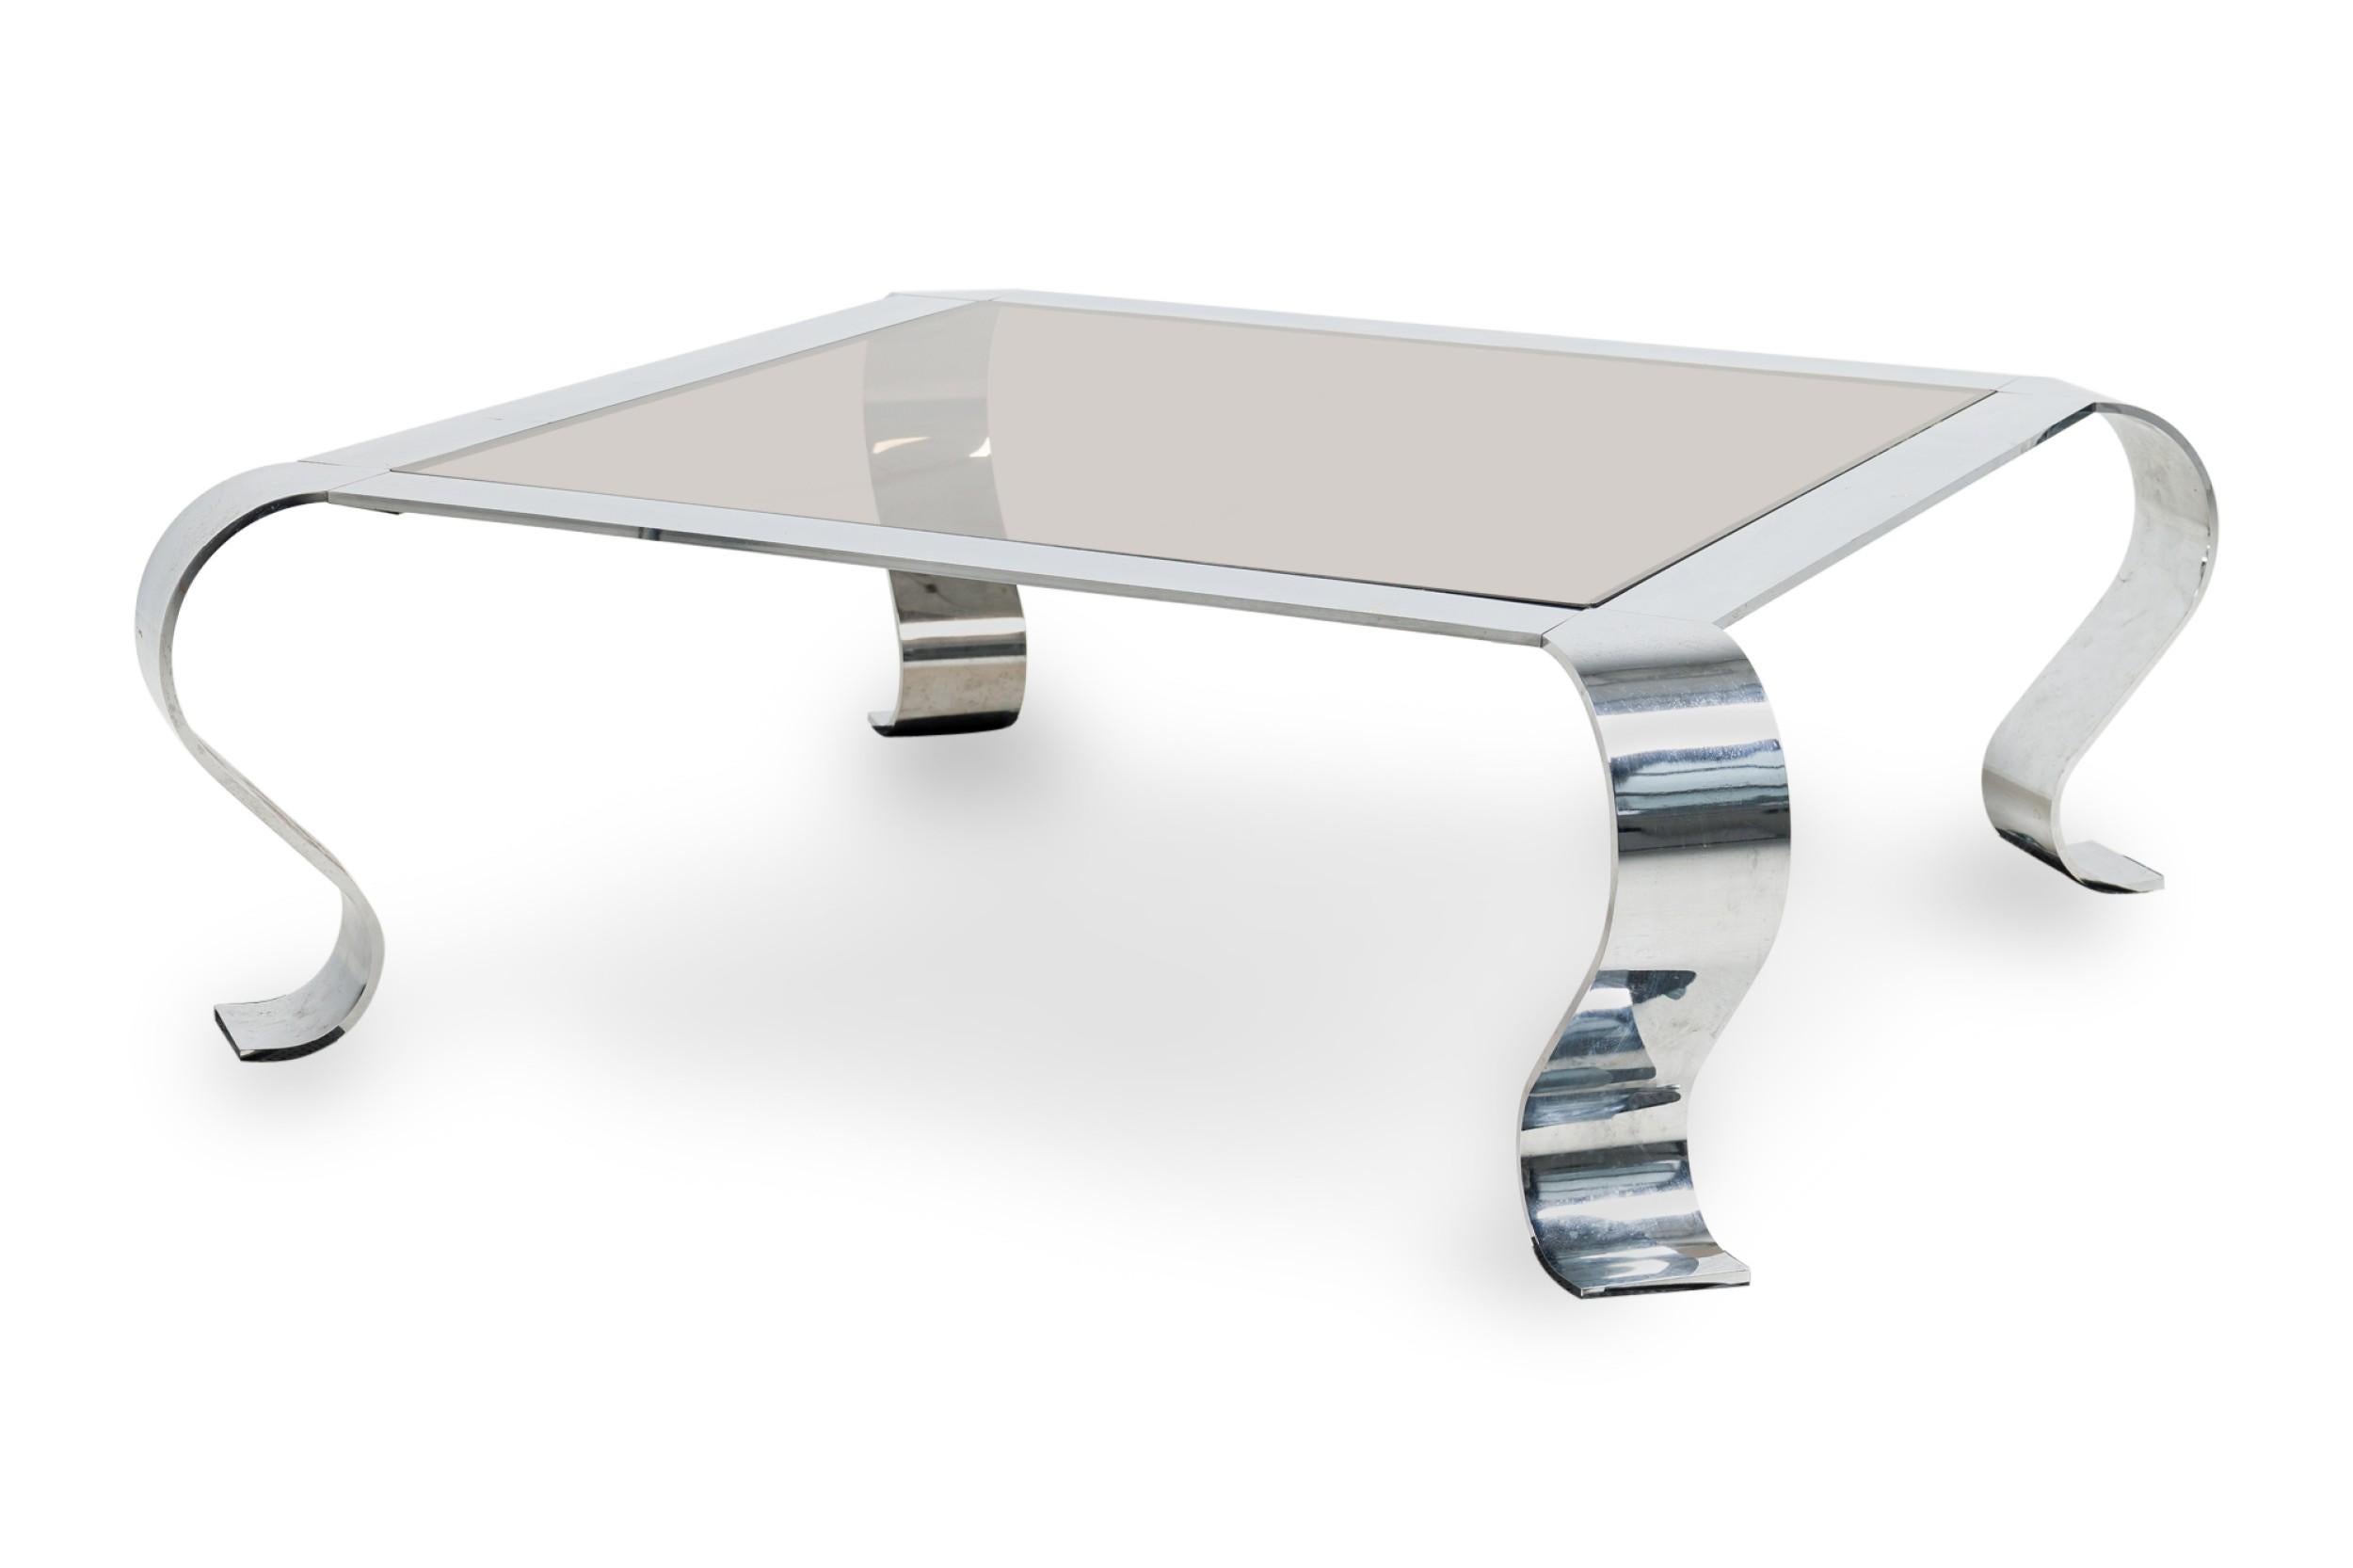 French Mid-Century chrome coffee table with a square inset glass top that lays in the center of the table resting on exagerated cabriole legs (FRANCOIS MONNET)
 

 Condition Notes: